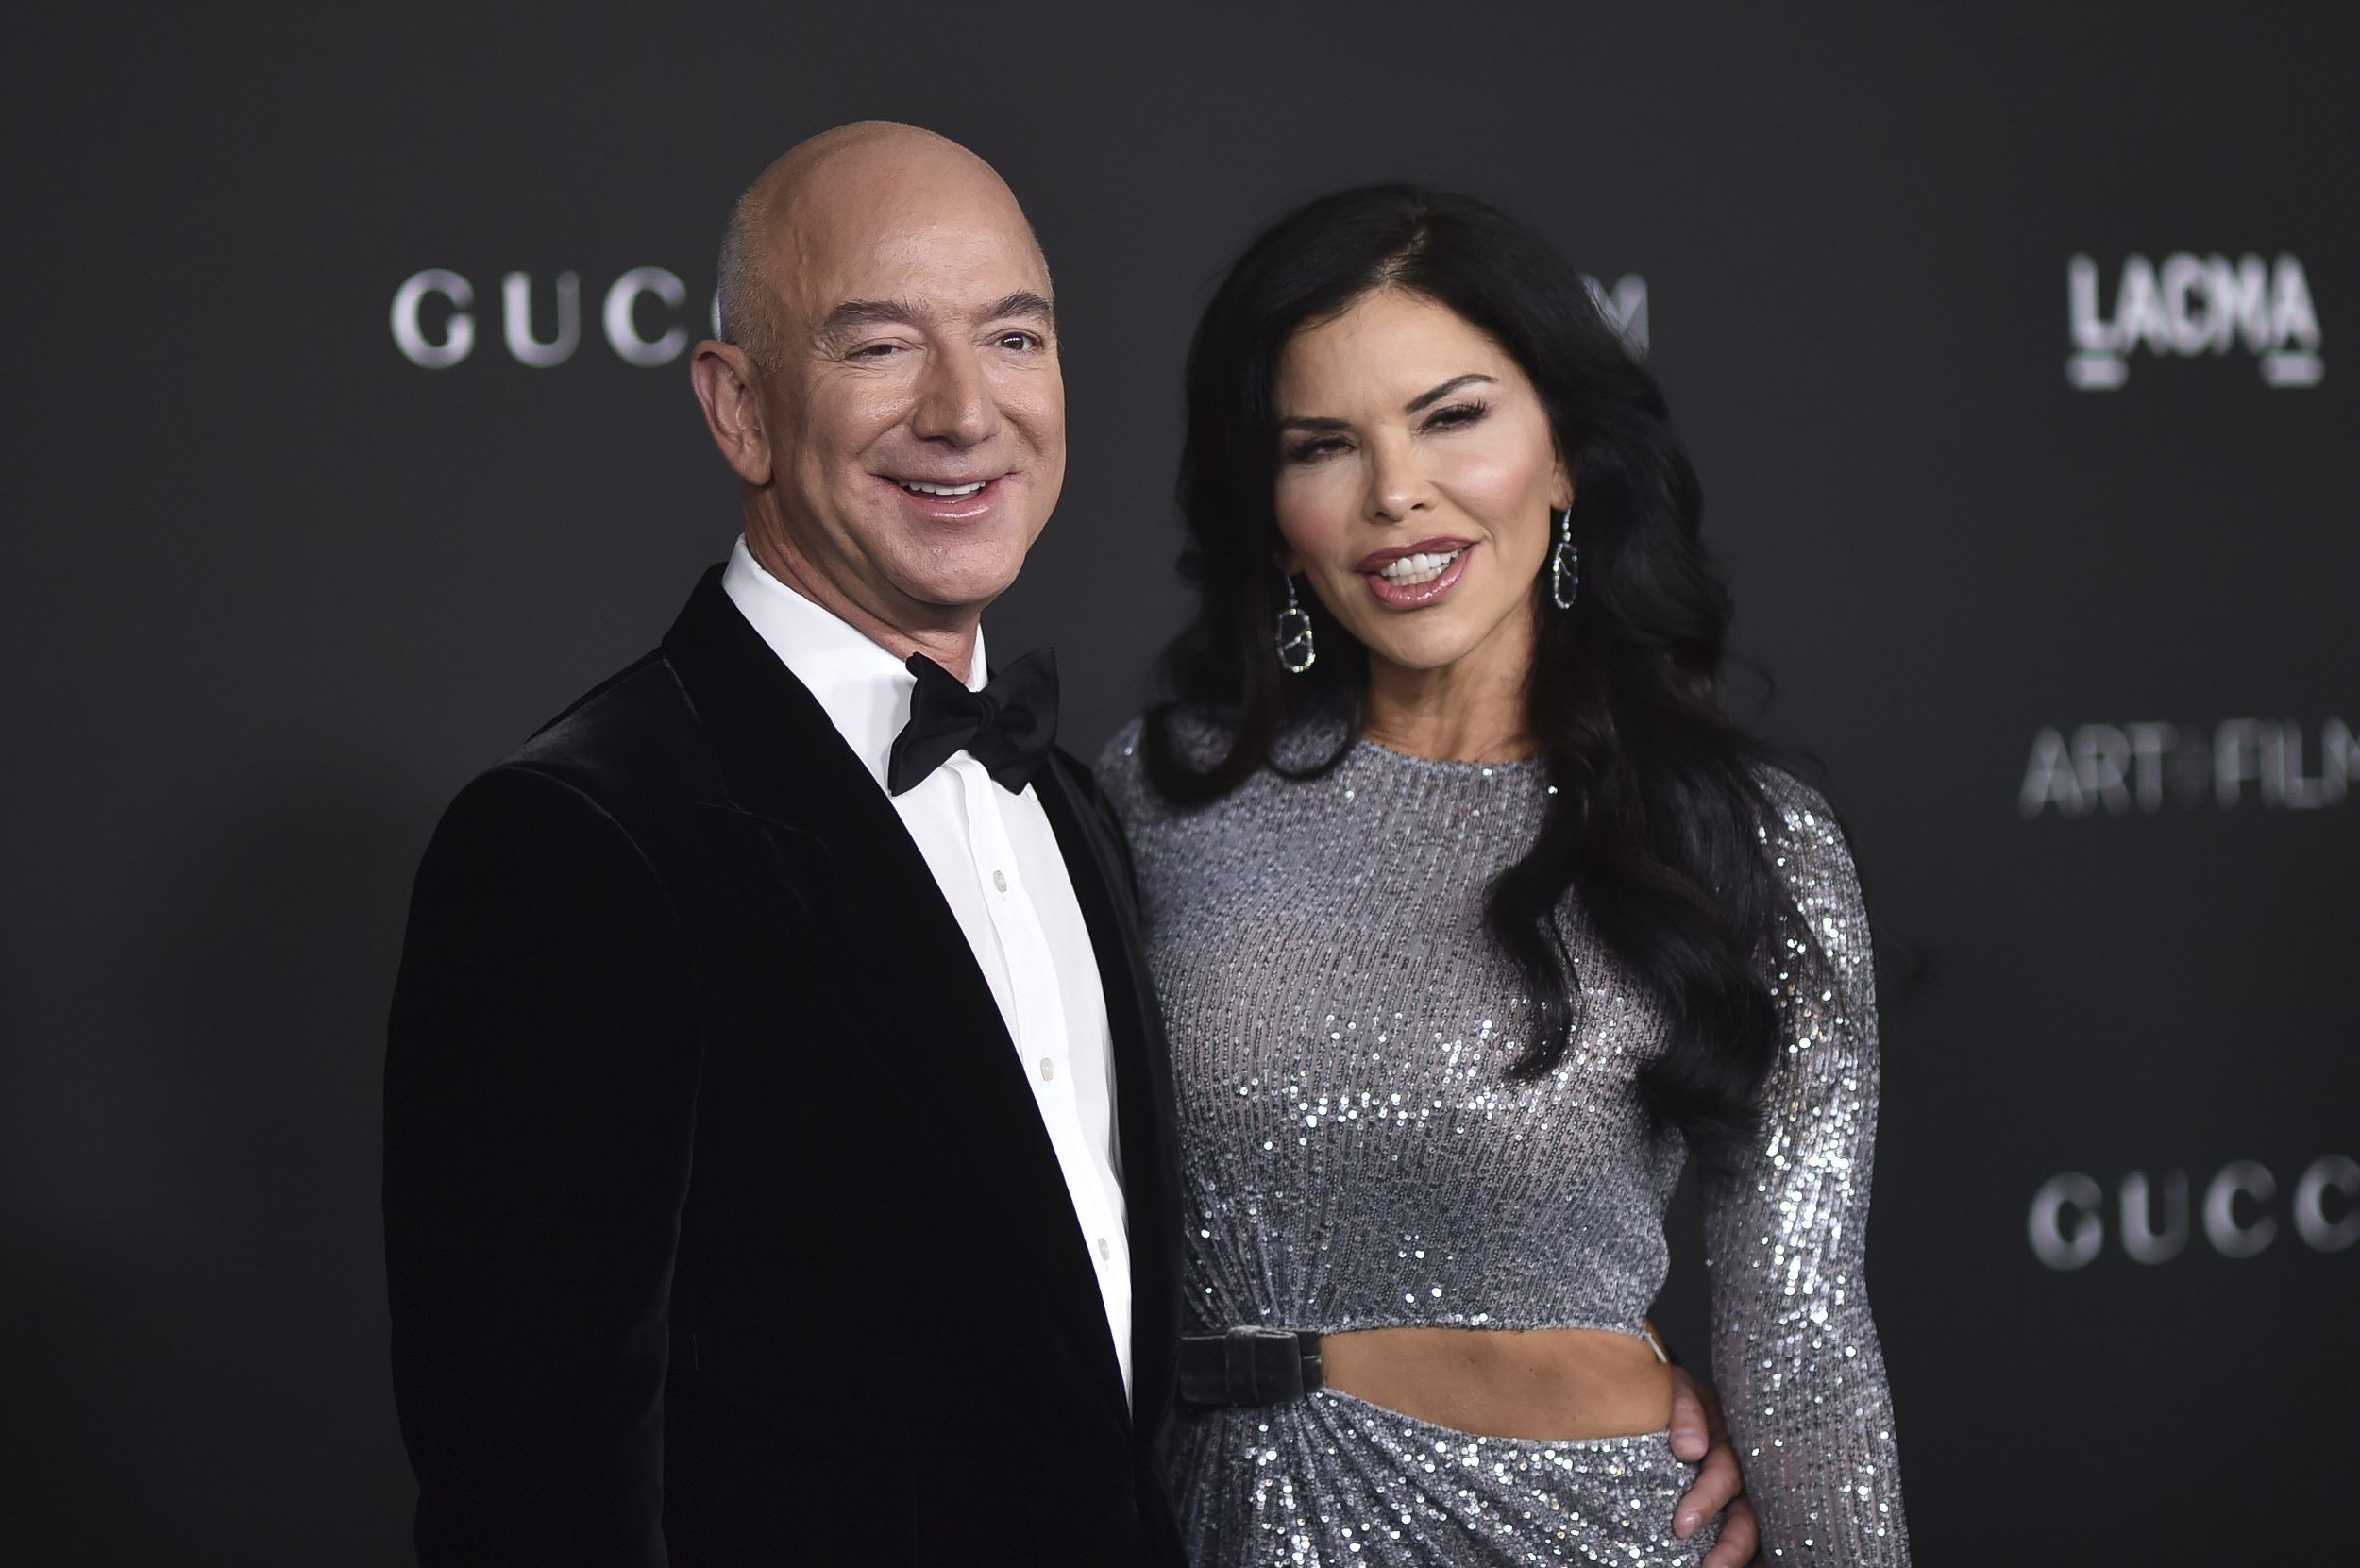 Lauren Sánchez on Going to Space, Giving Back, and Her High-Flying Romance  With Jeff Bezos